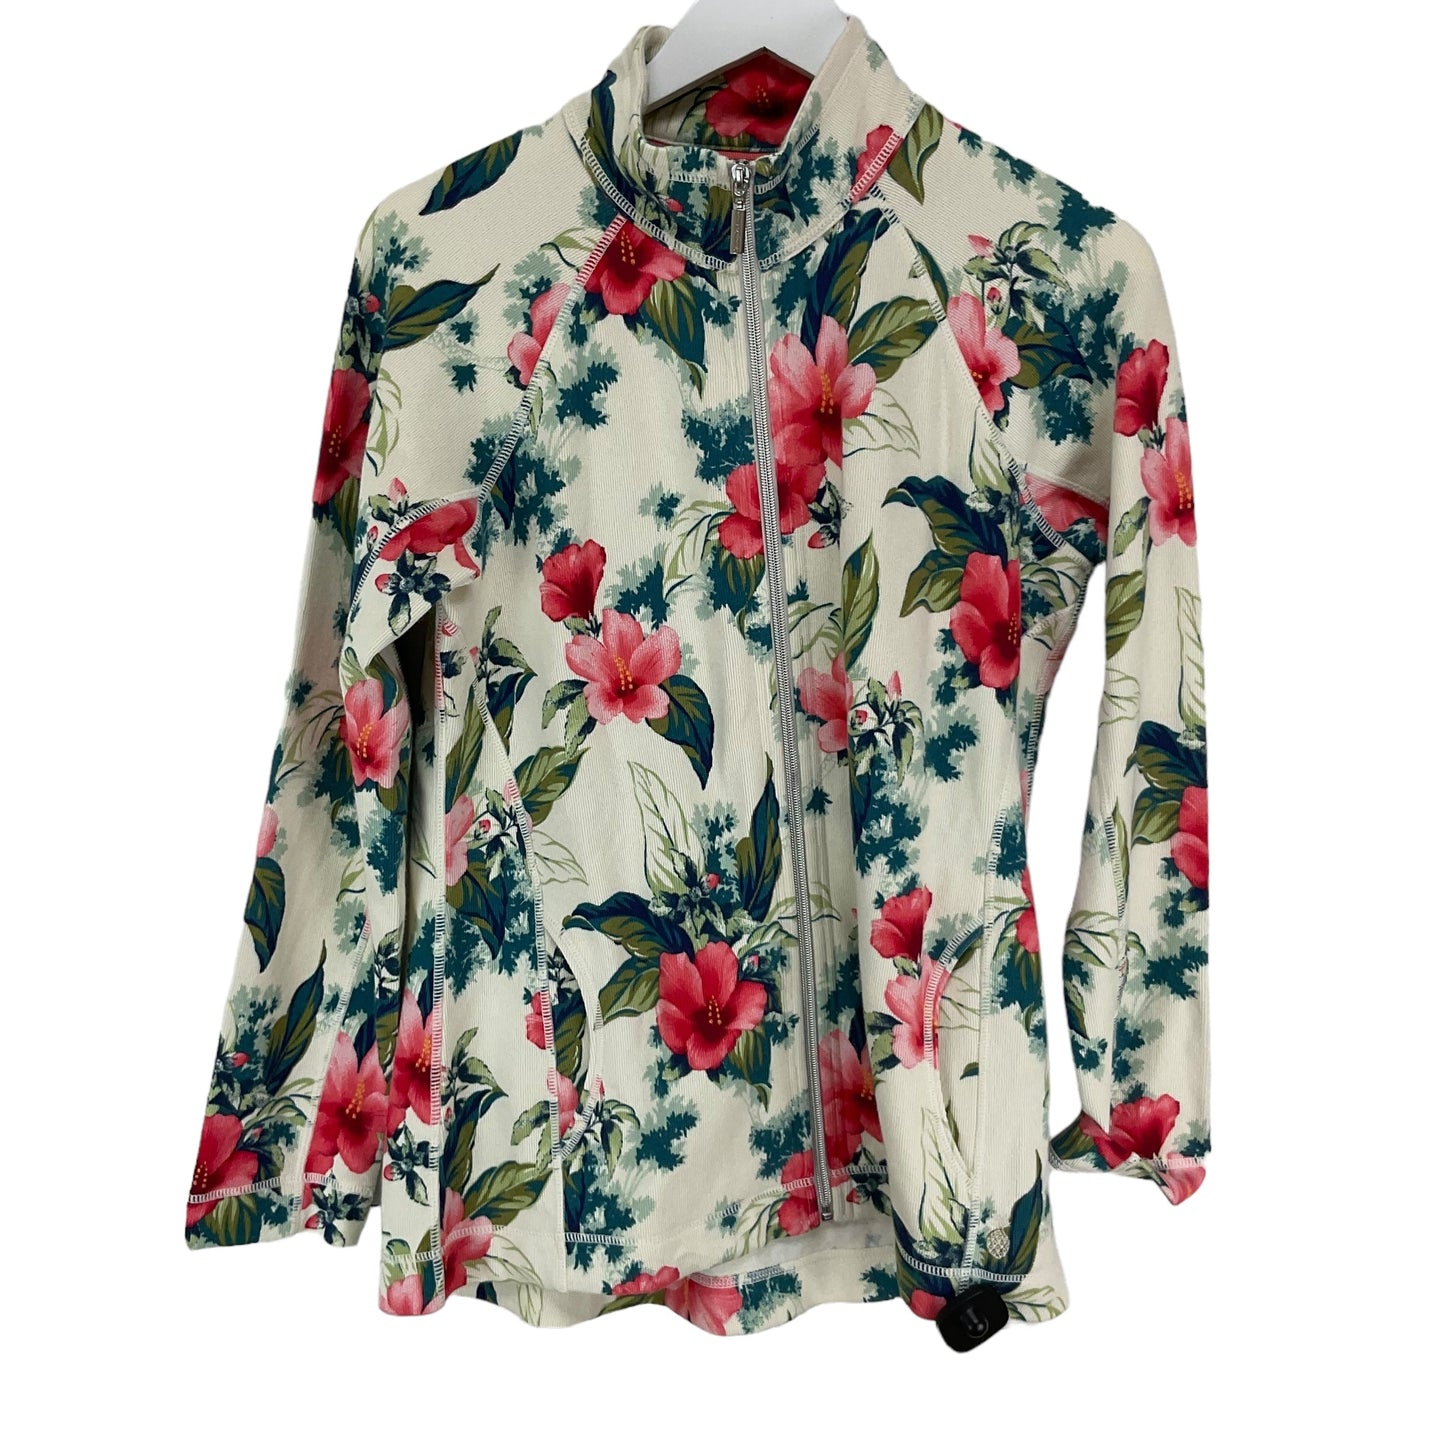 Floral Print Jacket Other Tommy Bahama, Size M